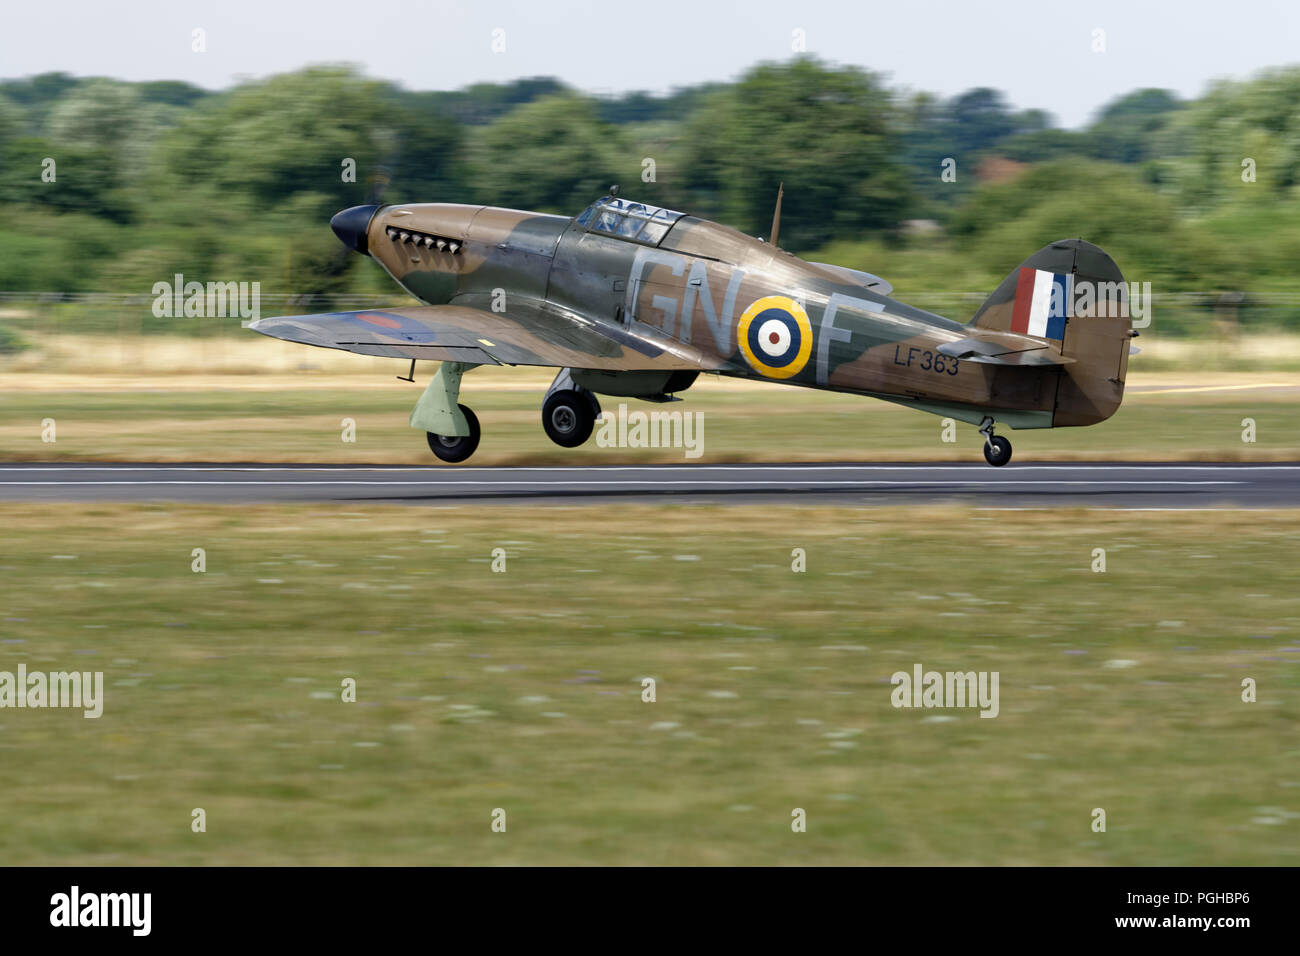 Hawker Hurricane LF363 of the Royal Air Force Battle of Britain Memorial Flight (BBMF) takes off from RAF Fairford at the RIAT Stock Photo